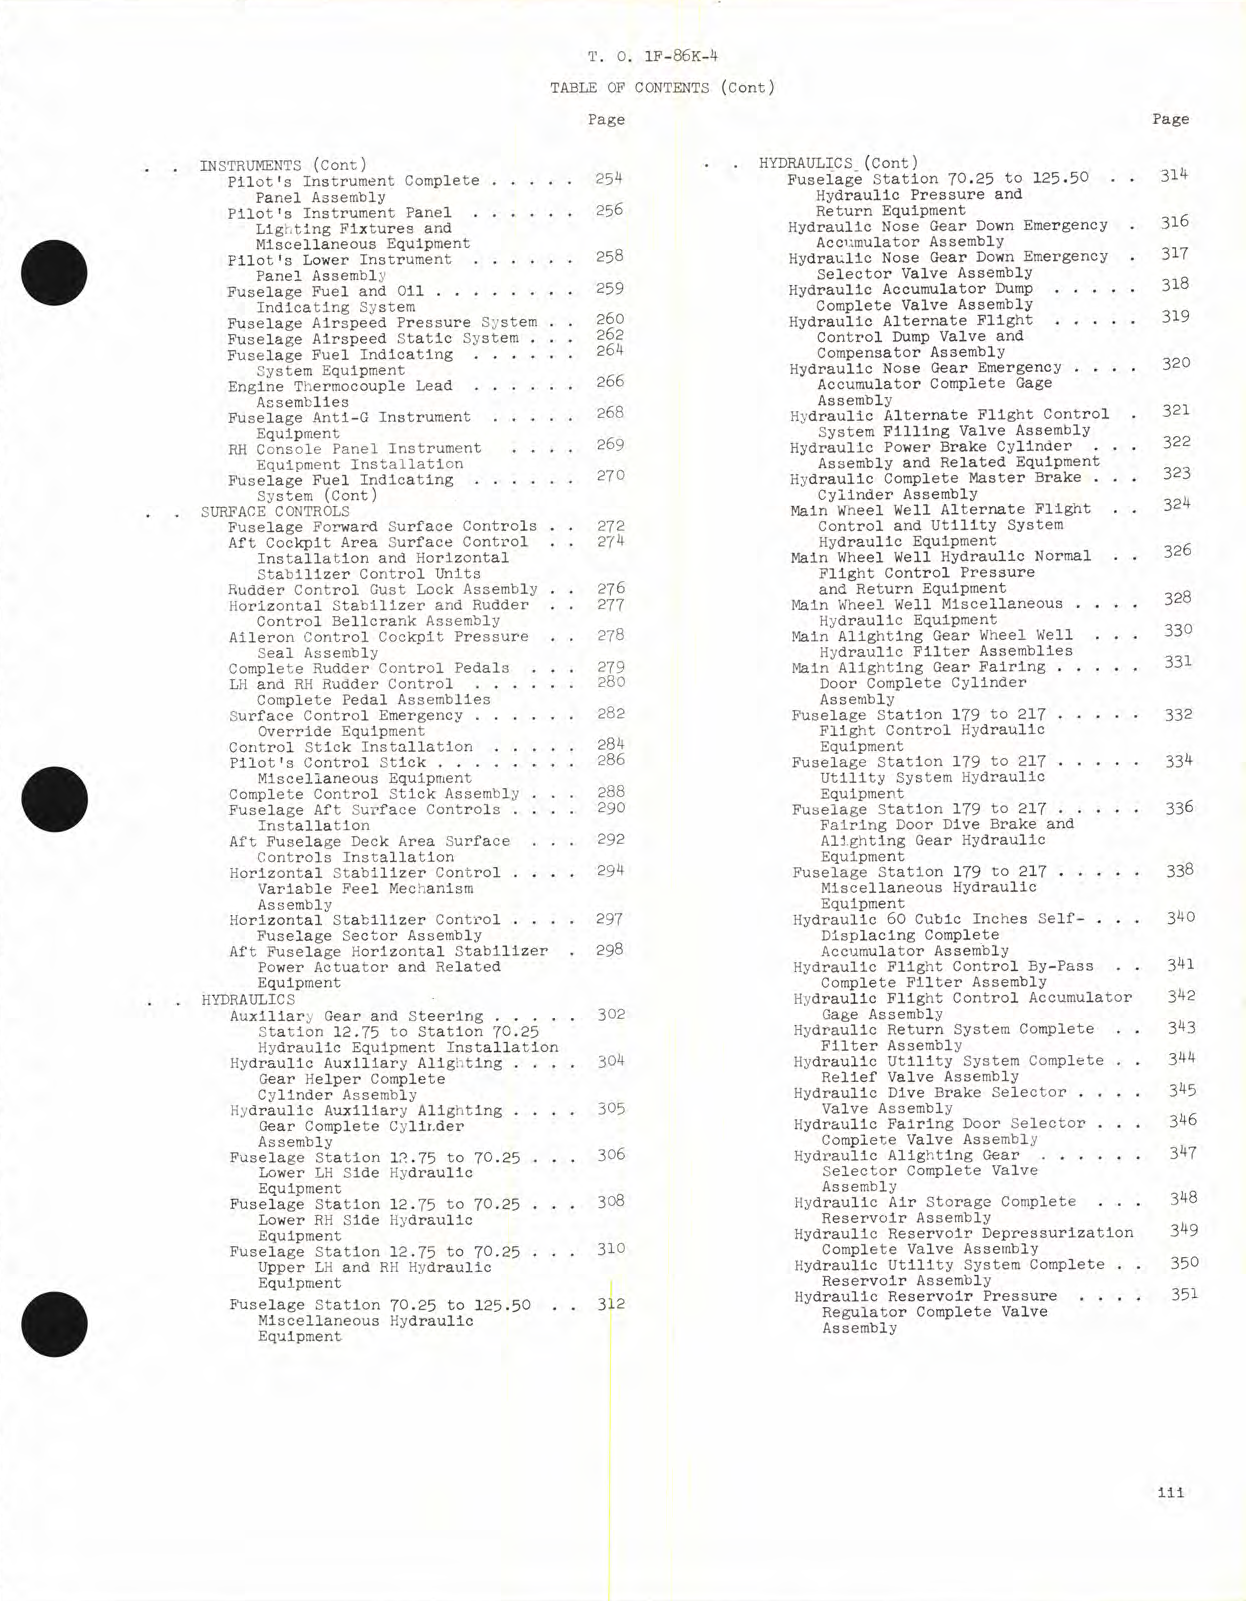 Sample page 5 from AirCorps Library document: Illustrated Parts Breakdown for F-86K Aircraft